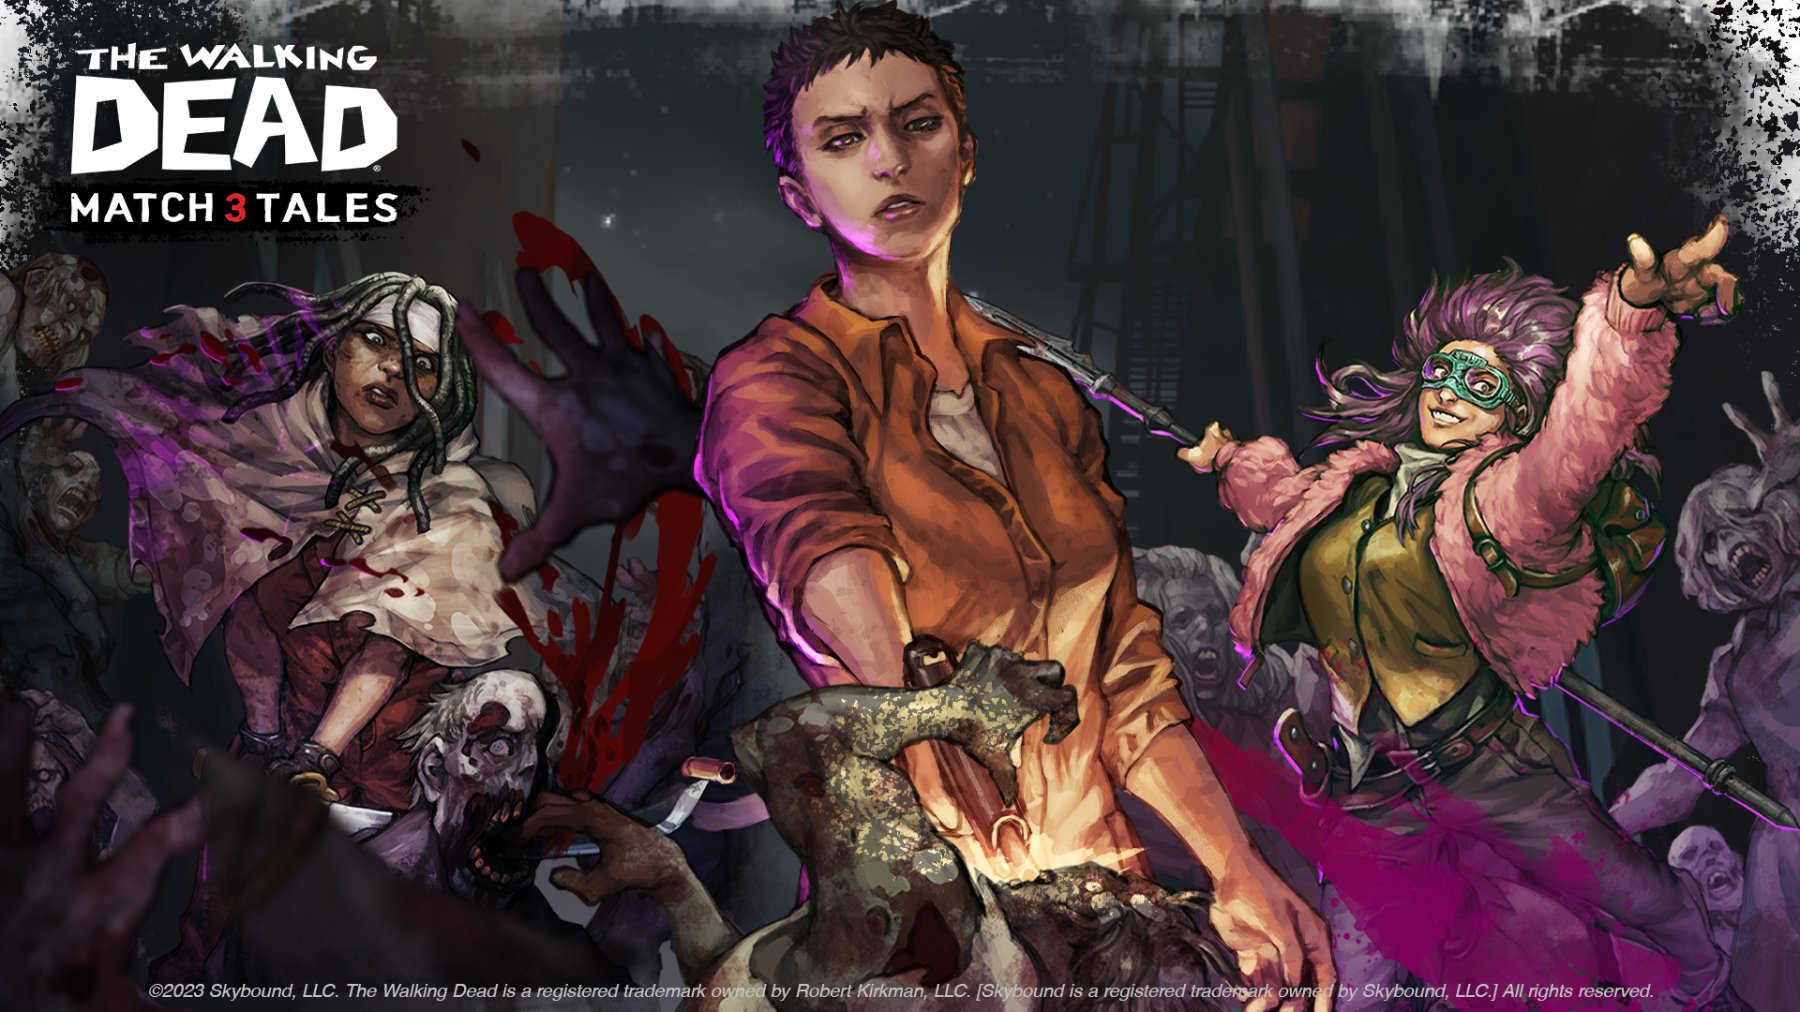 The Walking Dead Match 3 Tales Storms onto the App Store